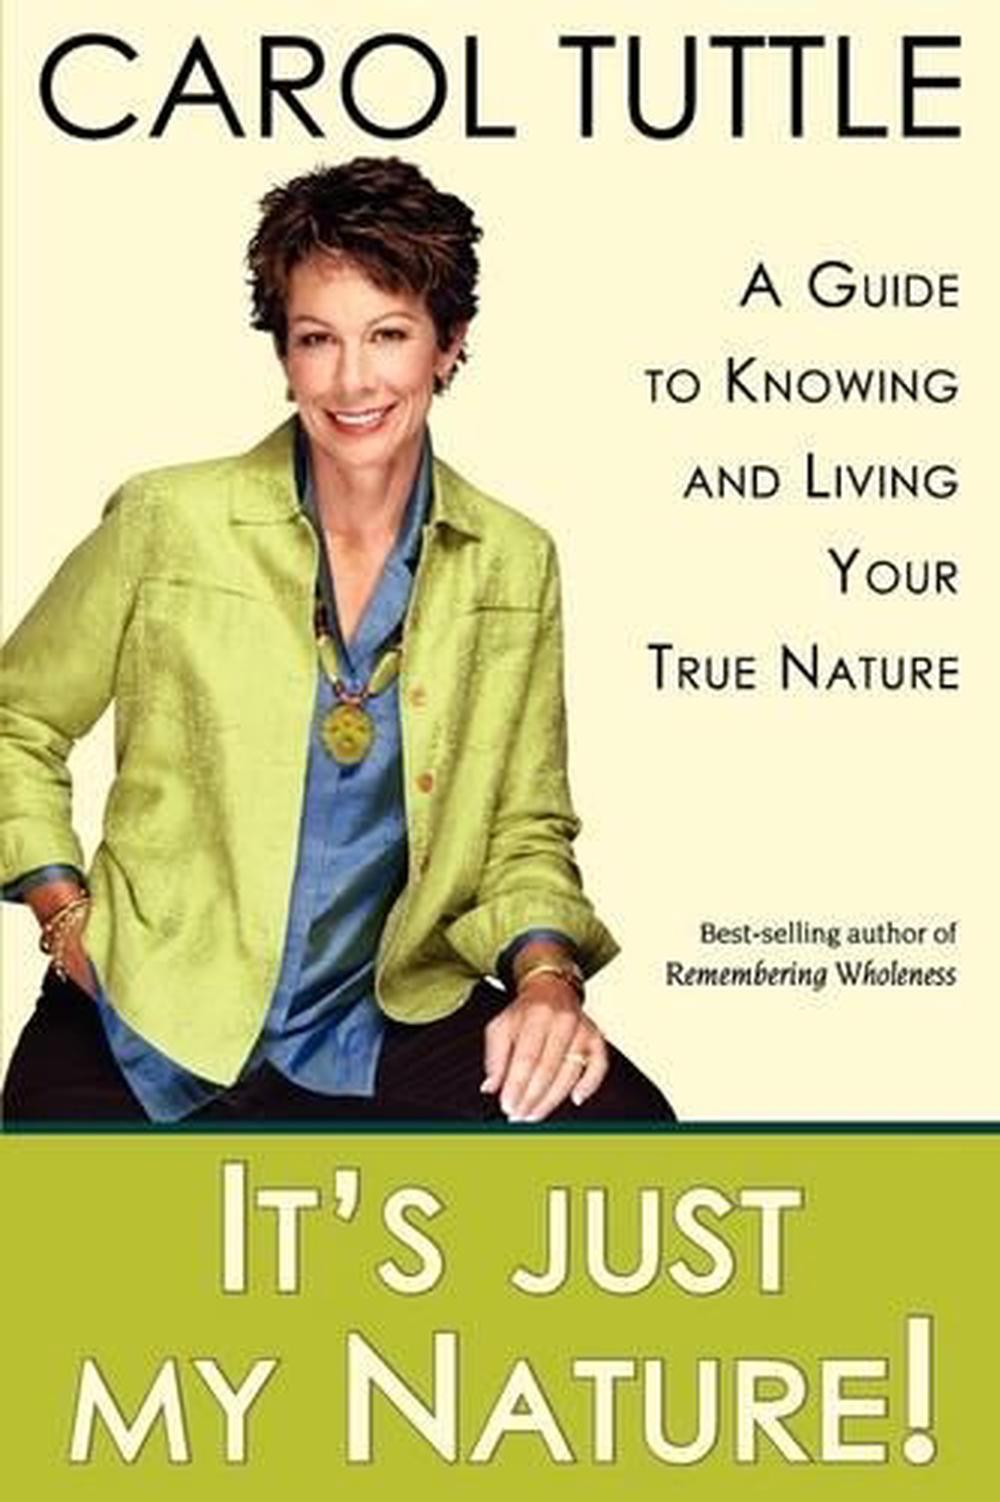 It's Just My Nature by Carol Tuttle (English) Paperback Book Free Shipping! 9780978543693 eBay